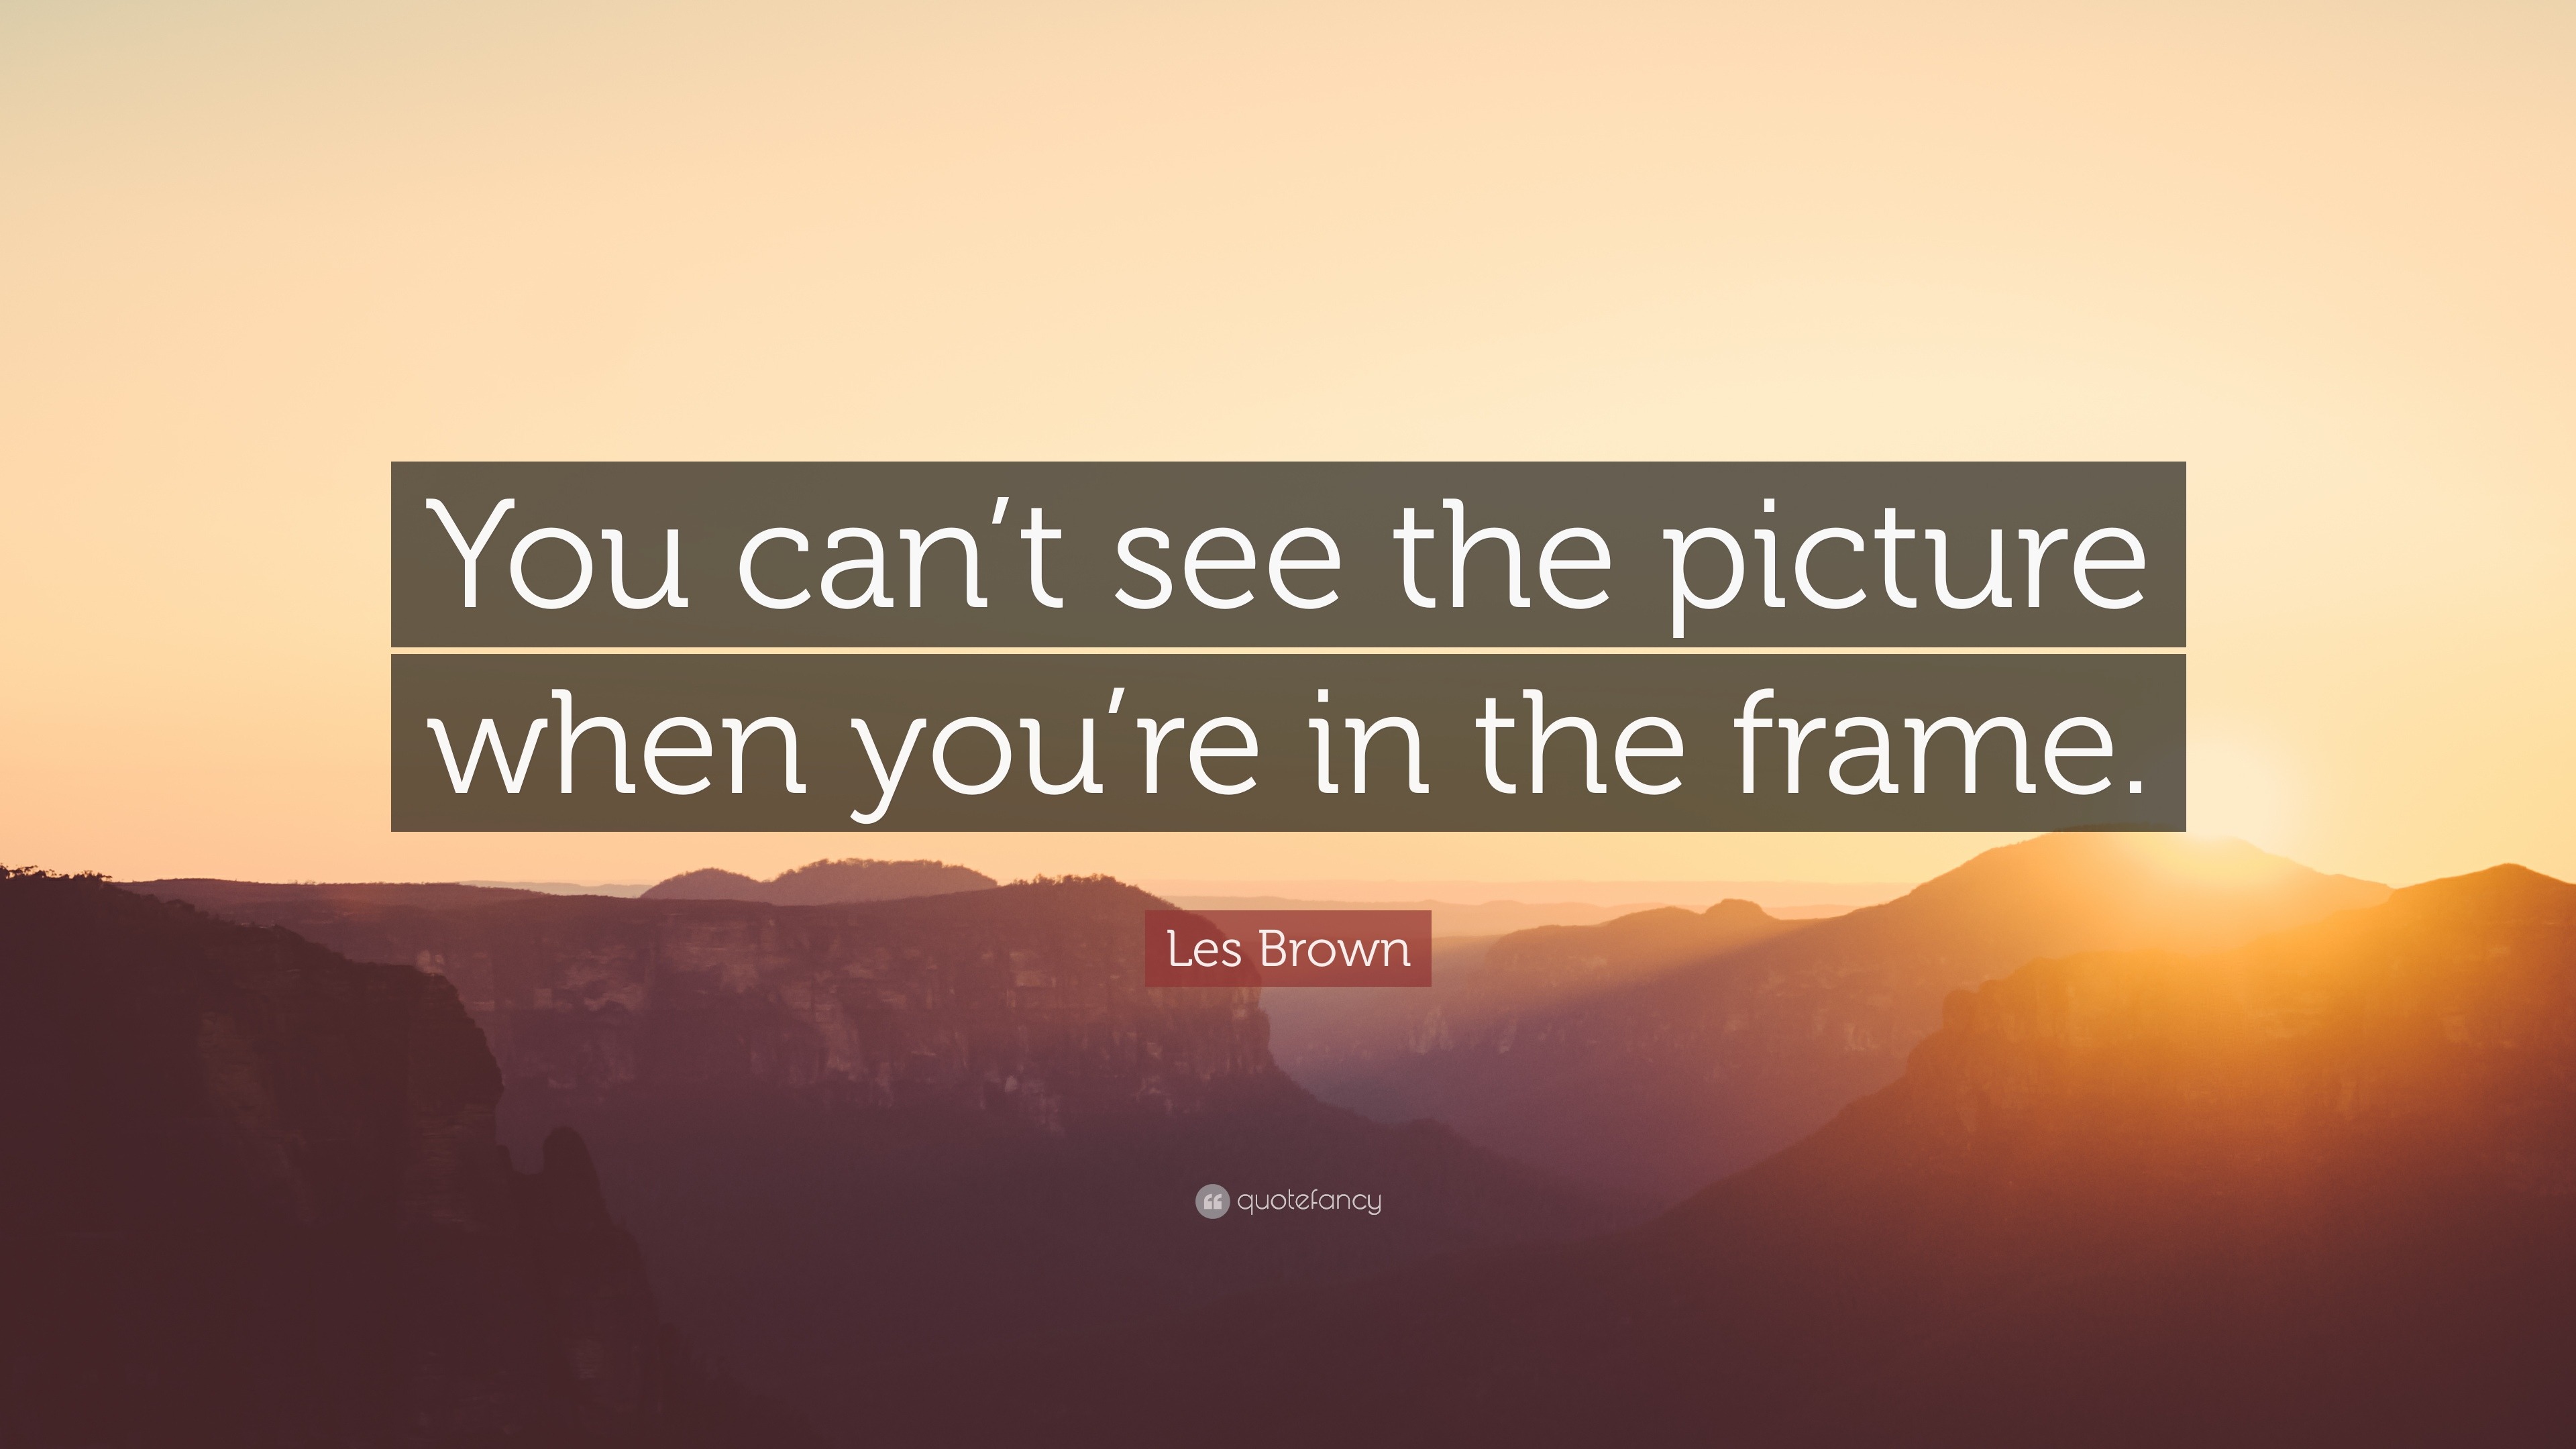 64197 Les Brown Quote You can t see the picture when you re in the frame